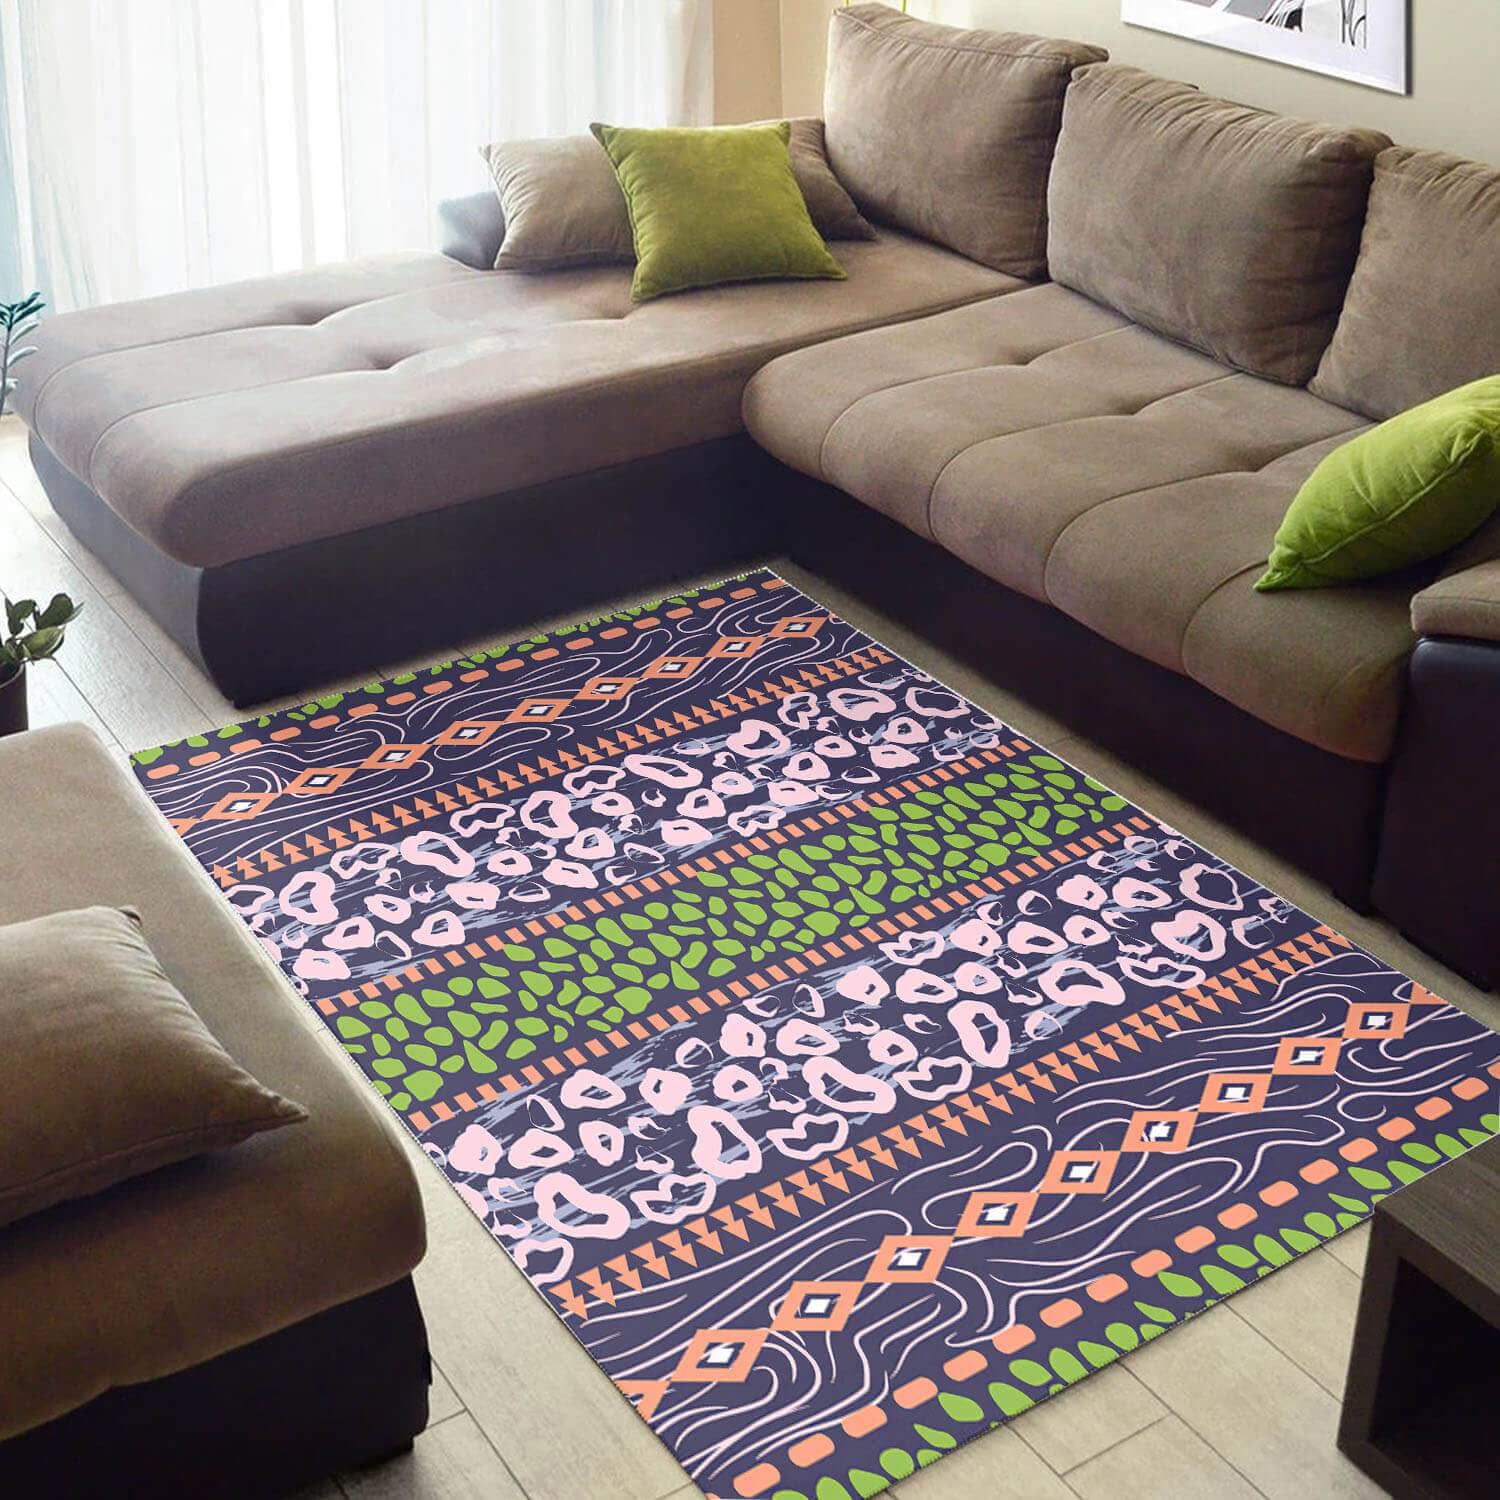 Modern African American Attractive Black History Month Afrocentric Art Design Floor Carpet Inspired Home Rug